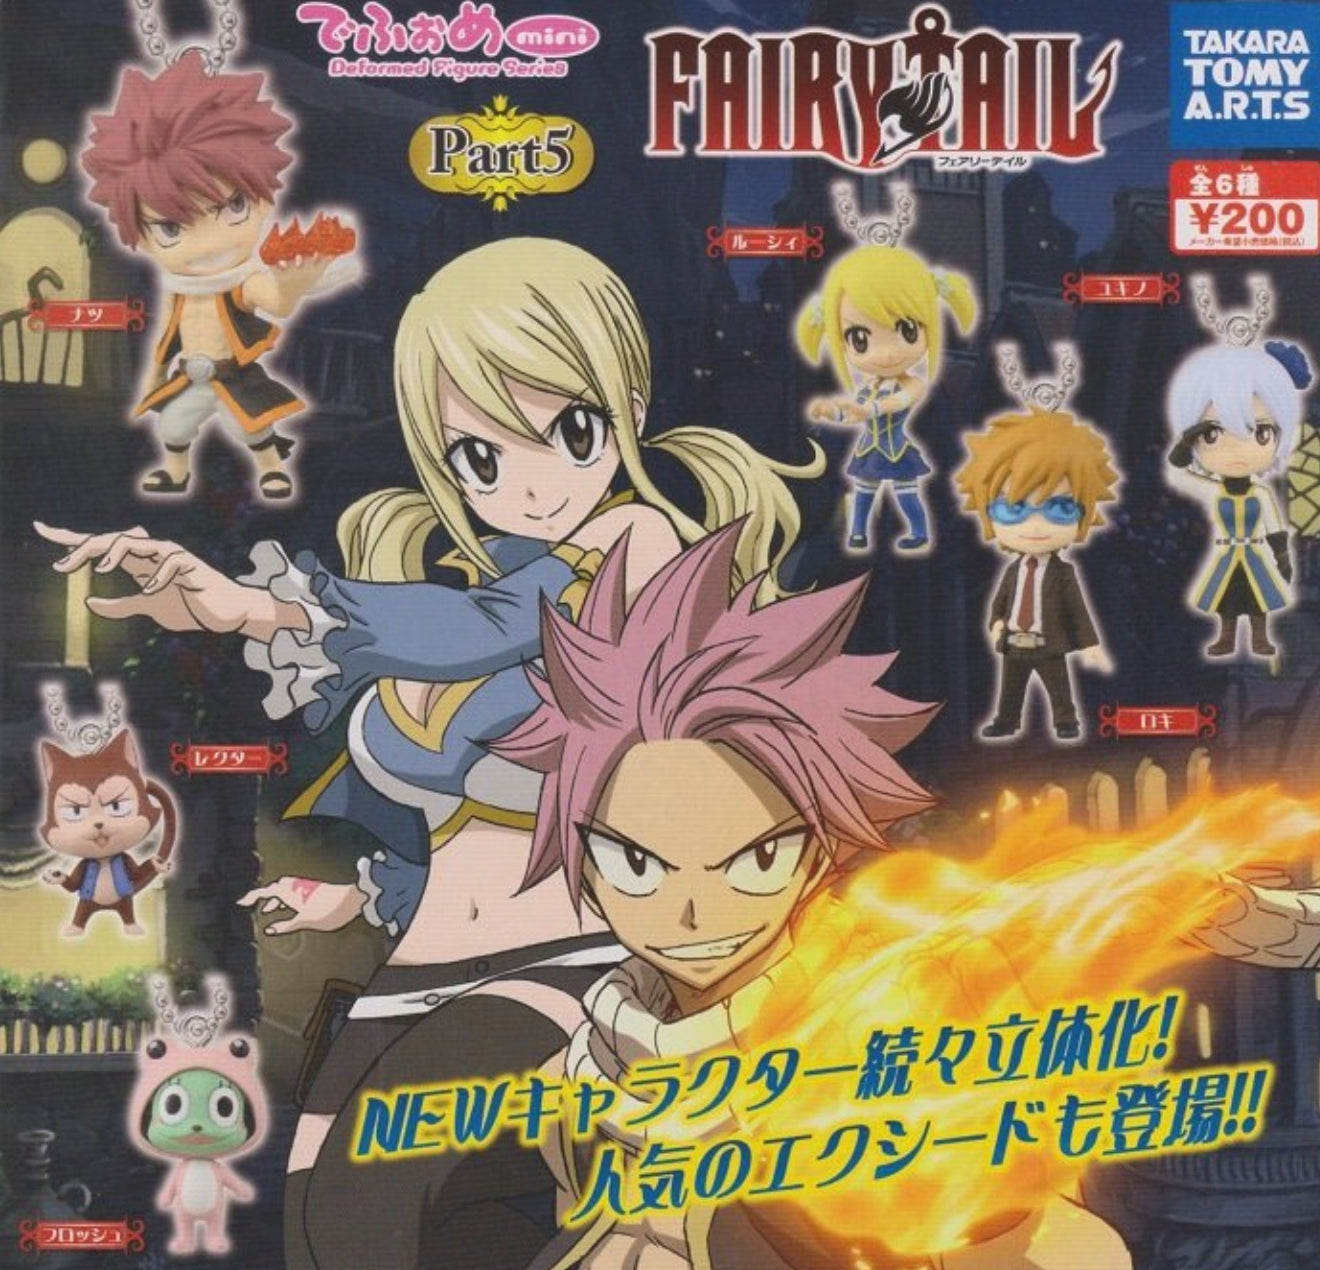 Takara Tomy Fairy Tail Gashapon Character Part 5 Mascot Strap Collection Figure Set